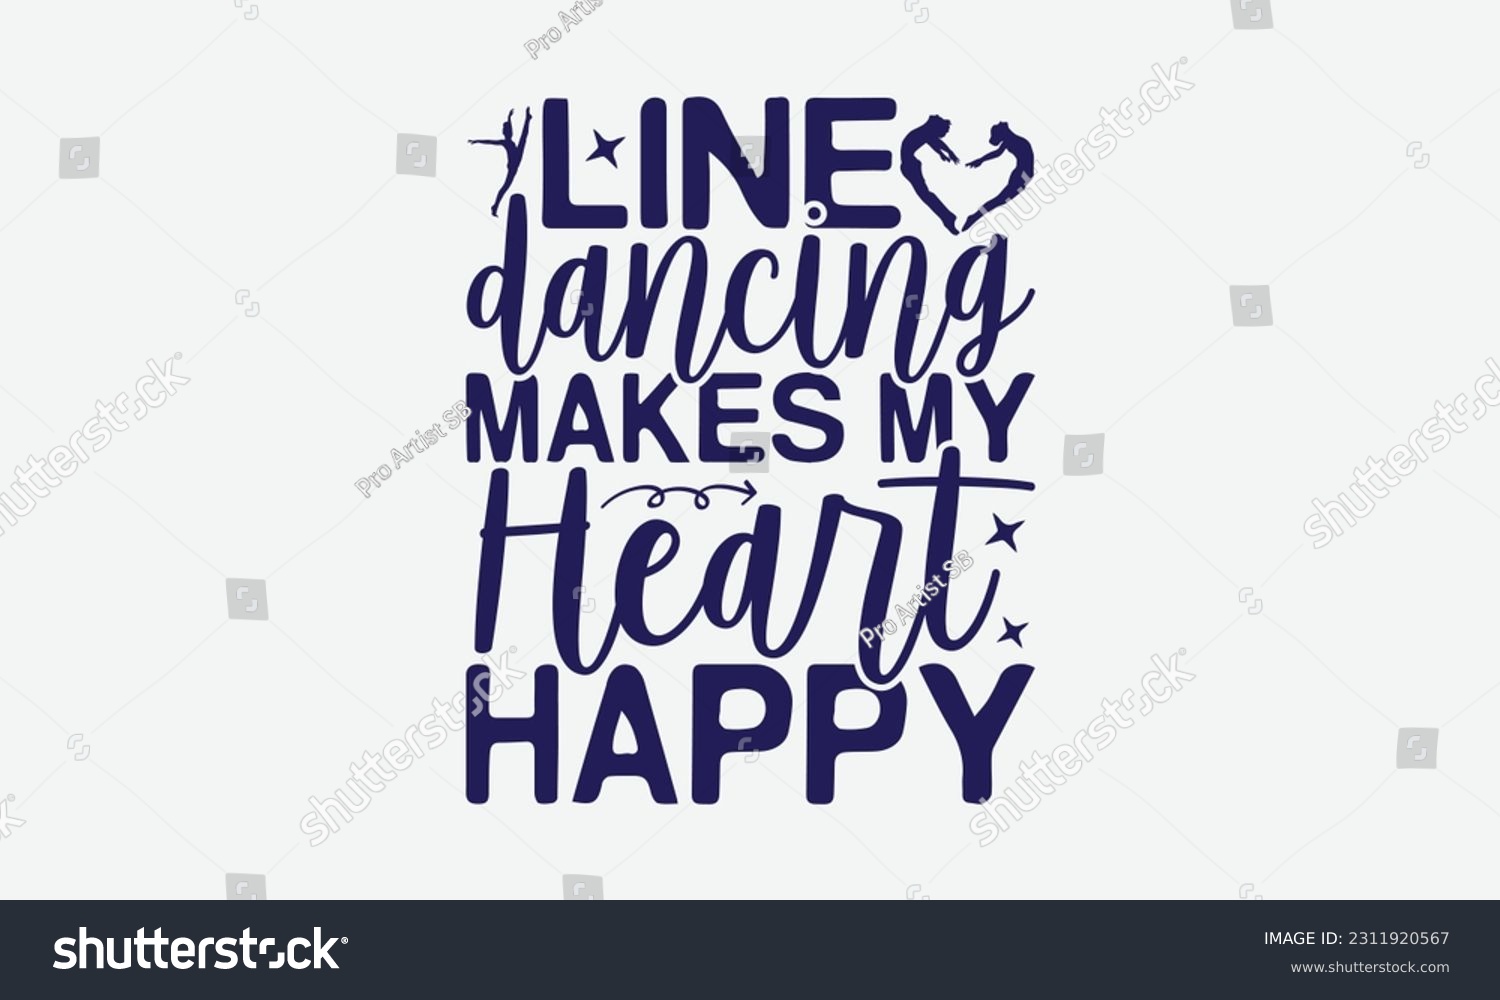 SVG of Line Dancing Makes My Heart Happy - Dancing SVG Design, Dance Quotes, Hand Drawn Vintage Hand Lettering, Poster Vector Design Template, and EPS 10. svg